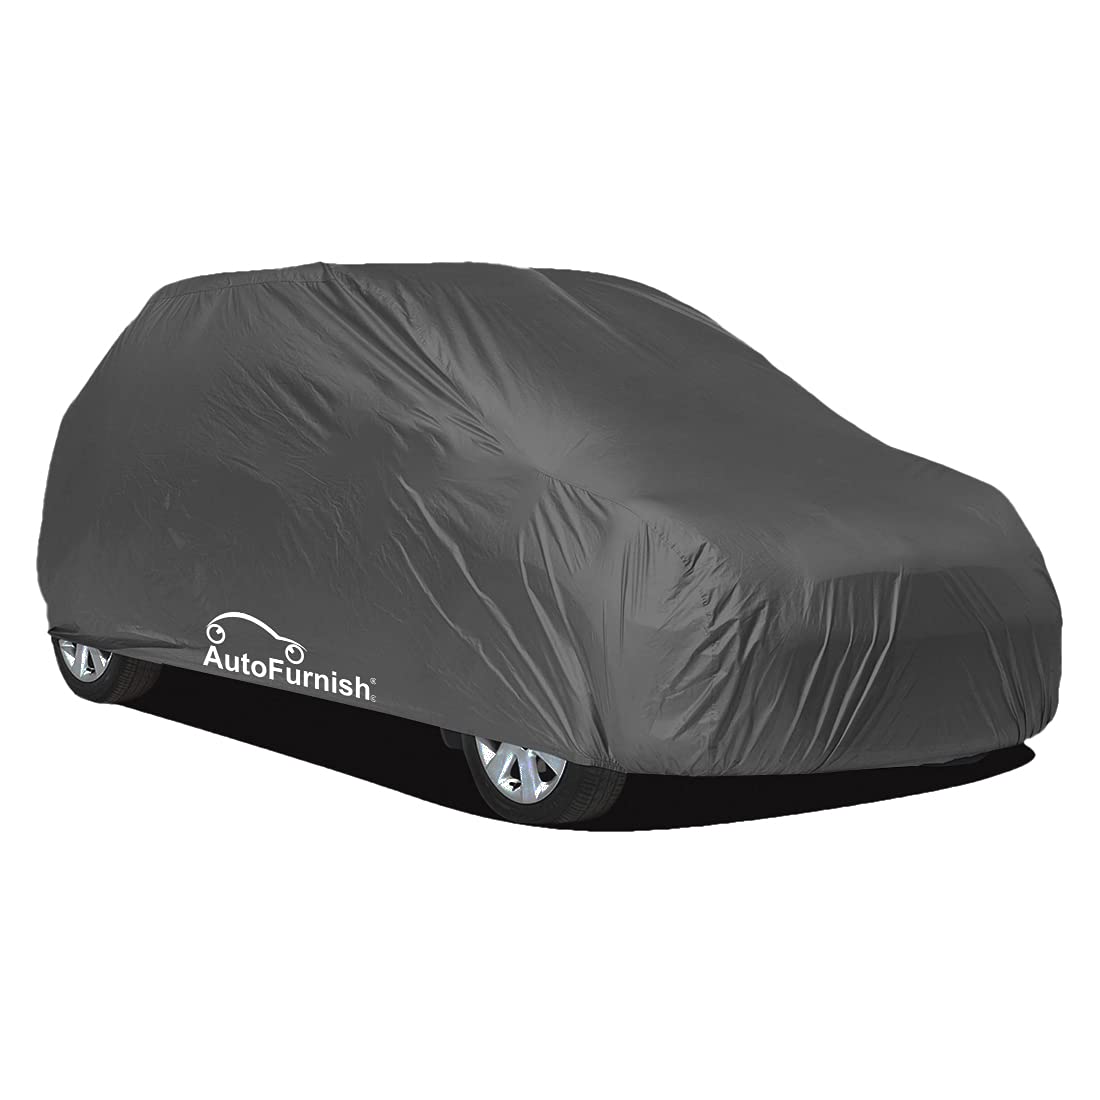 matty-silver-car-cover-for-fiat-linea-triple-stitched-water-resistant-and-heat-resistant